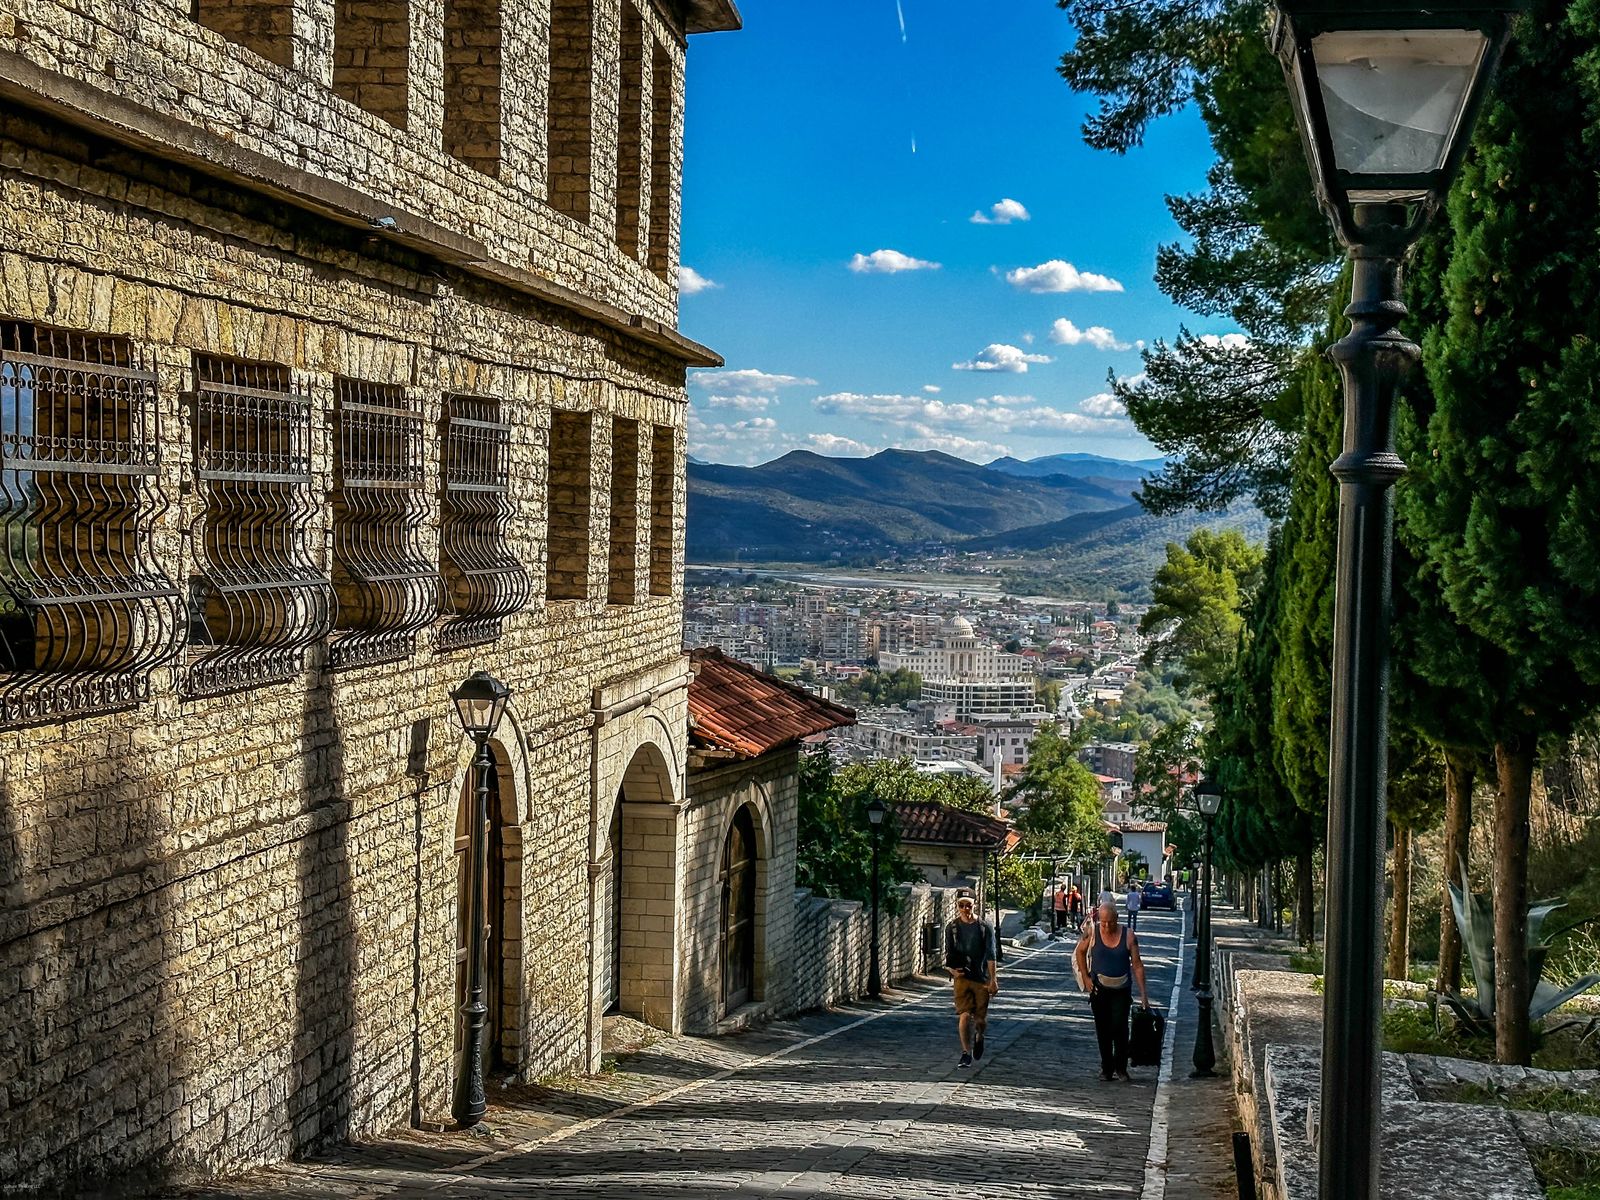 Things to see in berat Albania in one day